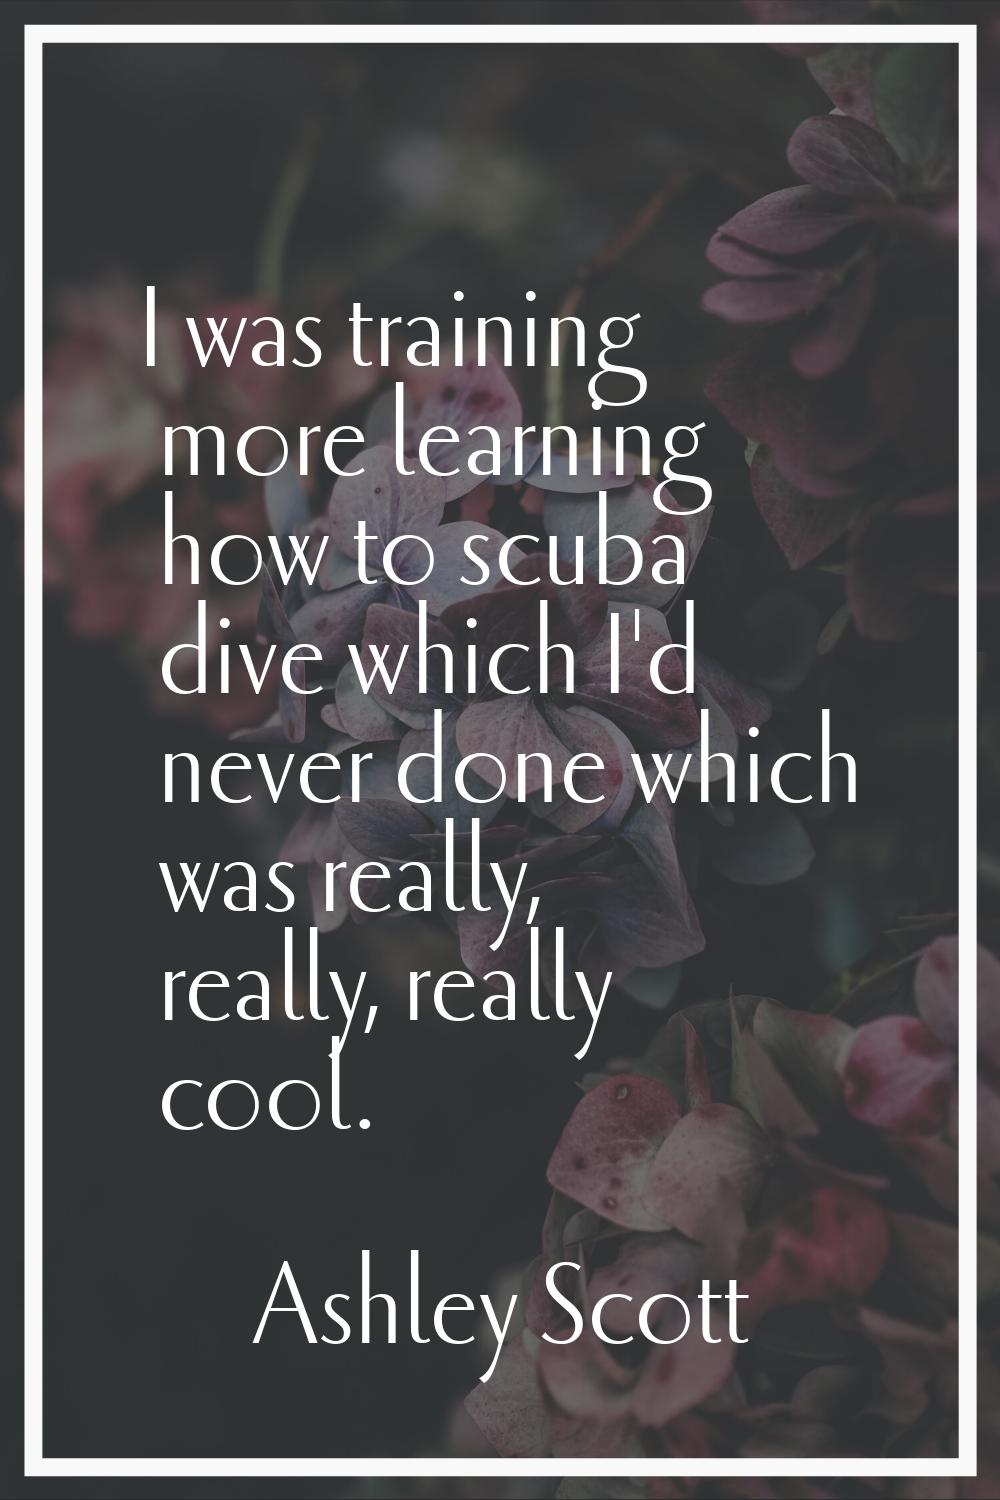 I was training more learning how to scuba dive which I'd never done which was really, really, reall